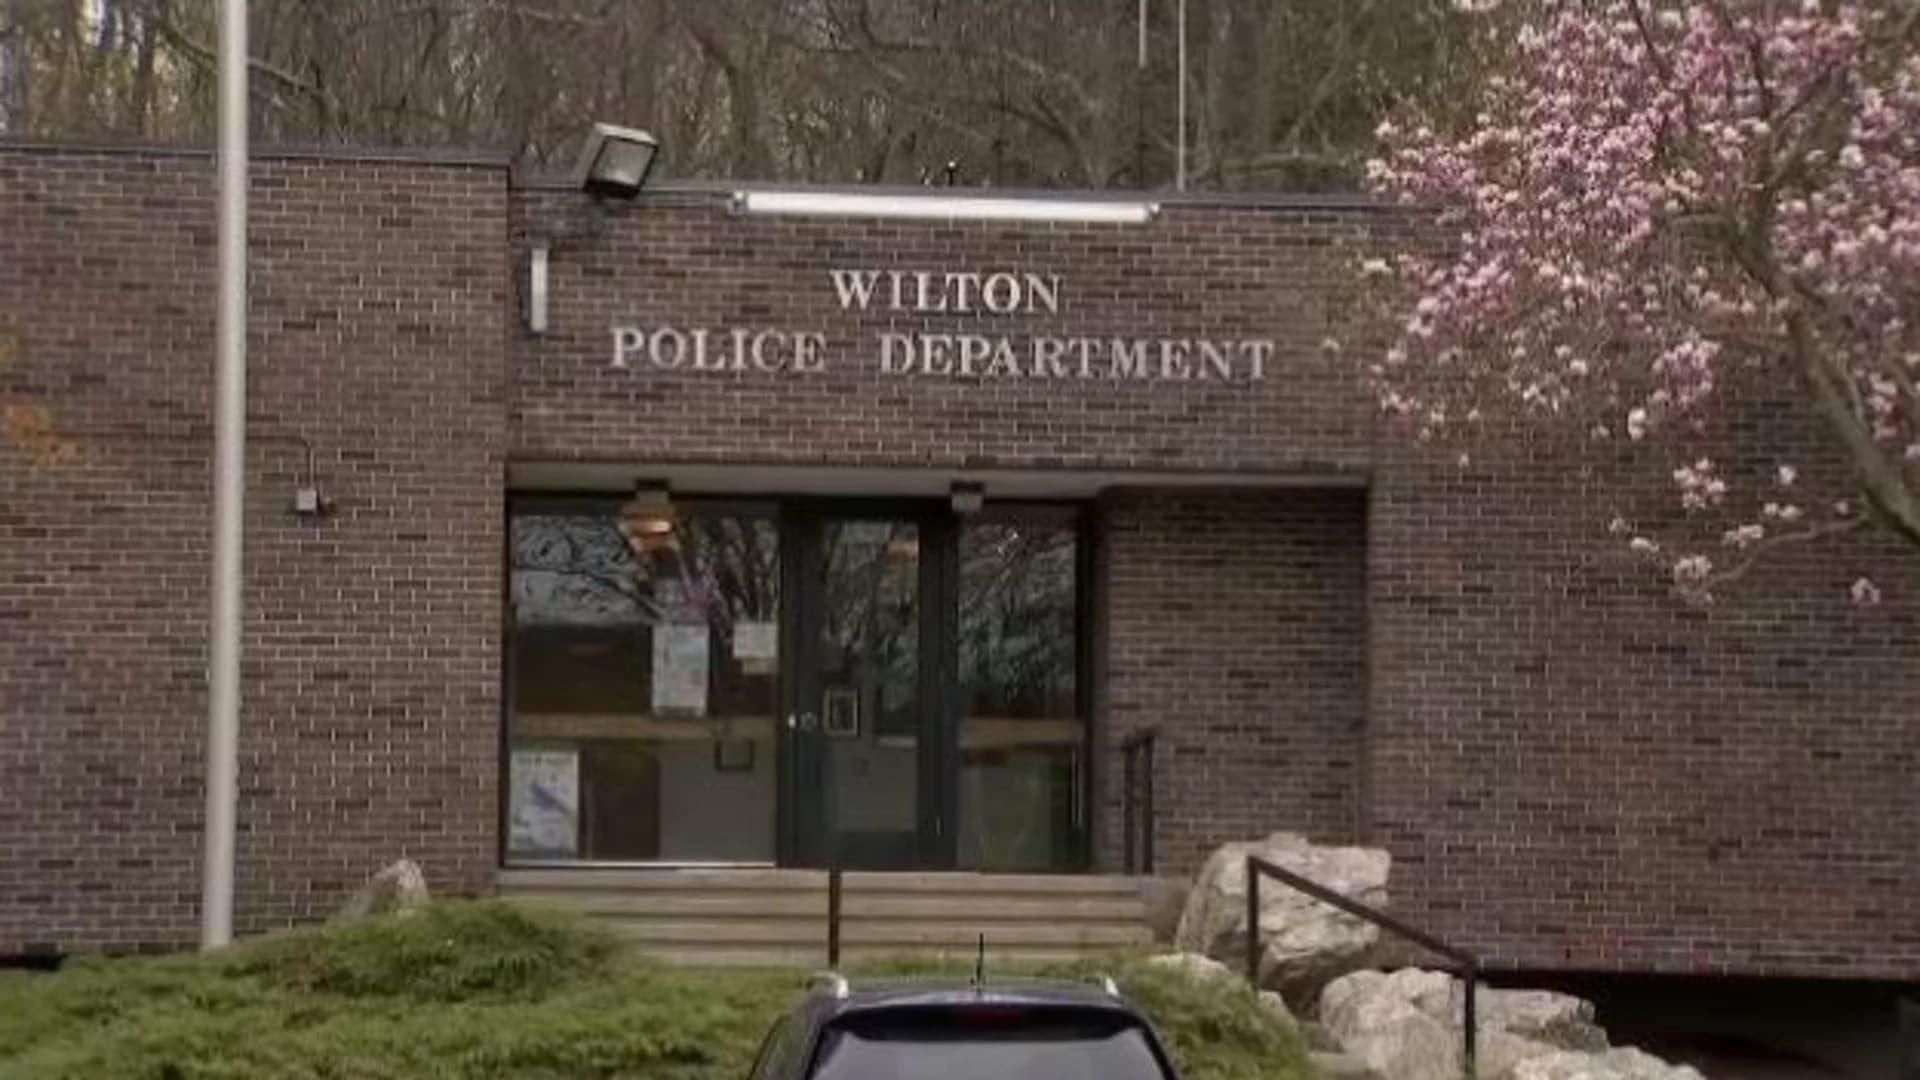 Residents in Wilton to vote on new budget, possibly expanding town police department building